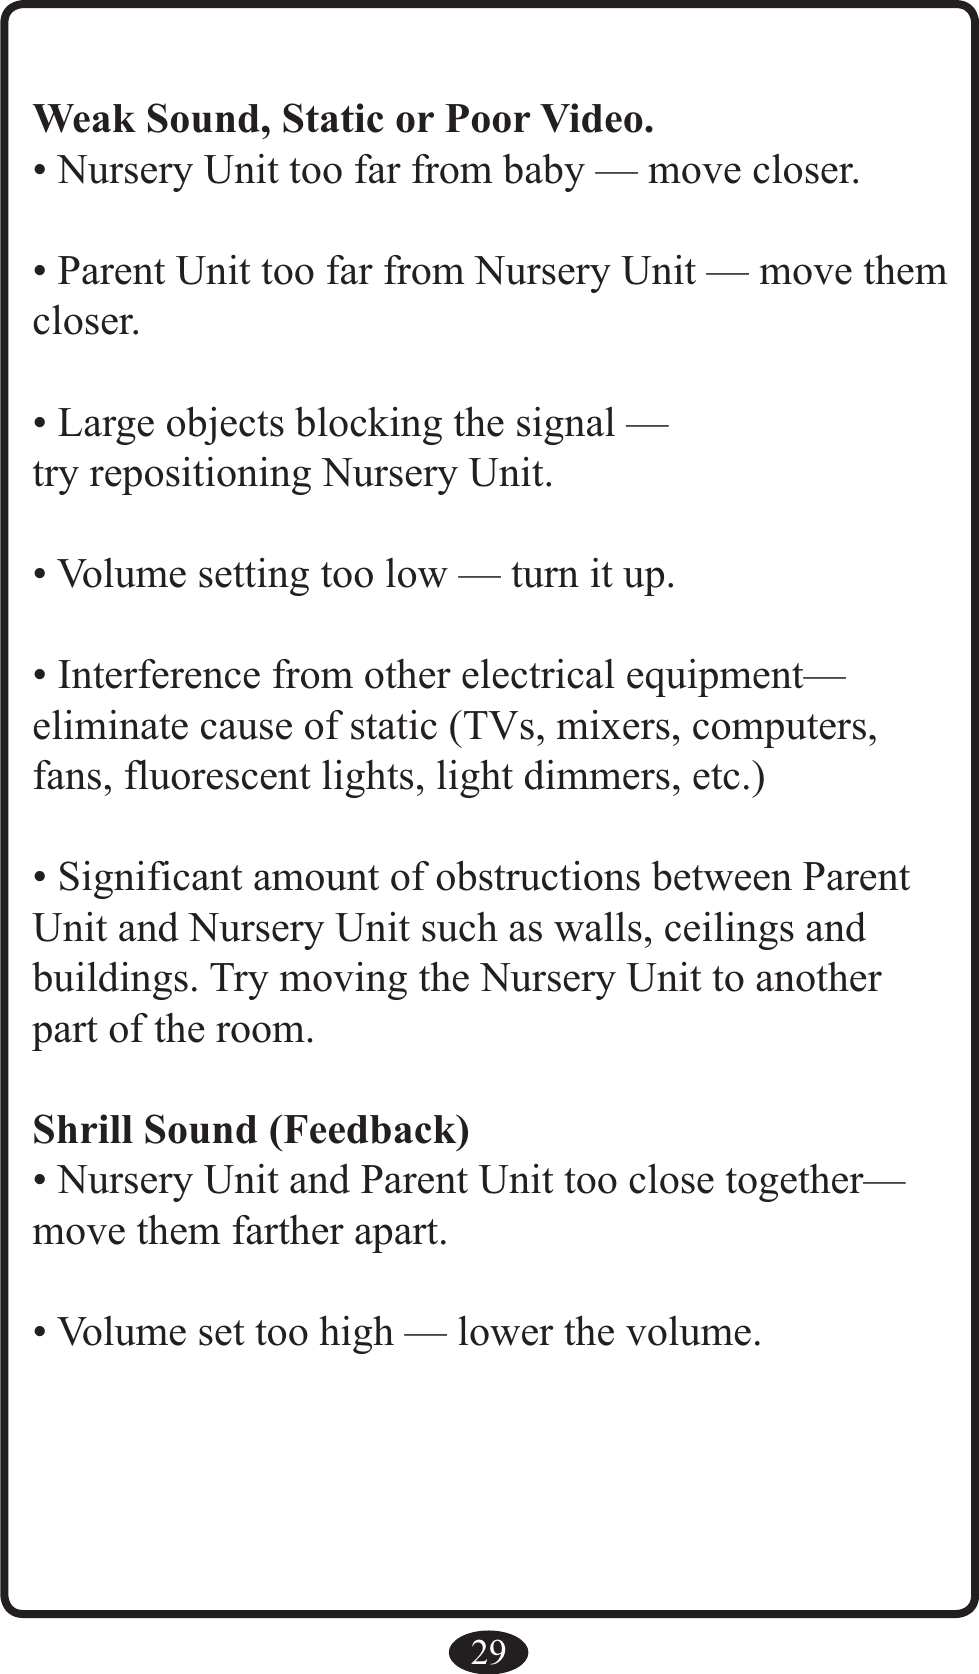 29Weak Sound, Static or Poor Video.• Nursery Unit too far from baby — move closer.• Parent Unit too far from Nursery Unit — move them closer.• Large objects blocking the signal —try repositioning Nursery Unit.• Volume setting too low — turn it up.• Interference from other electrical equipment— eliminate cause of static (TVs, mixers, computers, fans, fluorescent lights, light dimmers, etc.)• Significant amount of obstructions between Parent Unit and Nursery Unit such as walls, ceilings andbuildings. Try moving the Nursery Unit to another part of the room.Shrill Sound (Feedback)• Nursery Unit and Parent Unit too close together— move them farther apart.• Volume set too high — lower the volume.